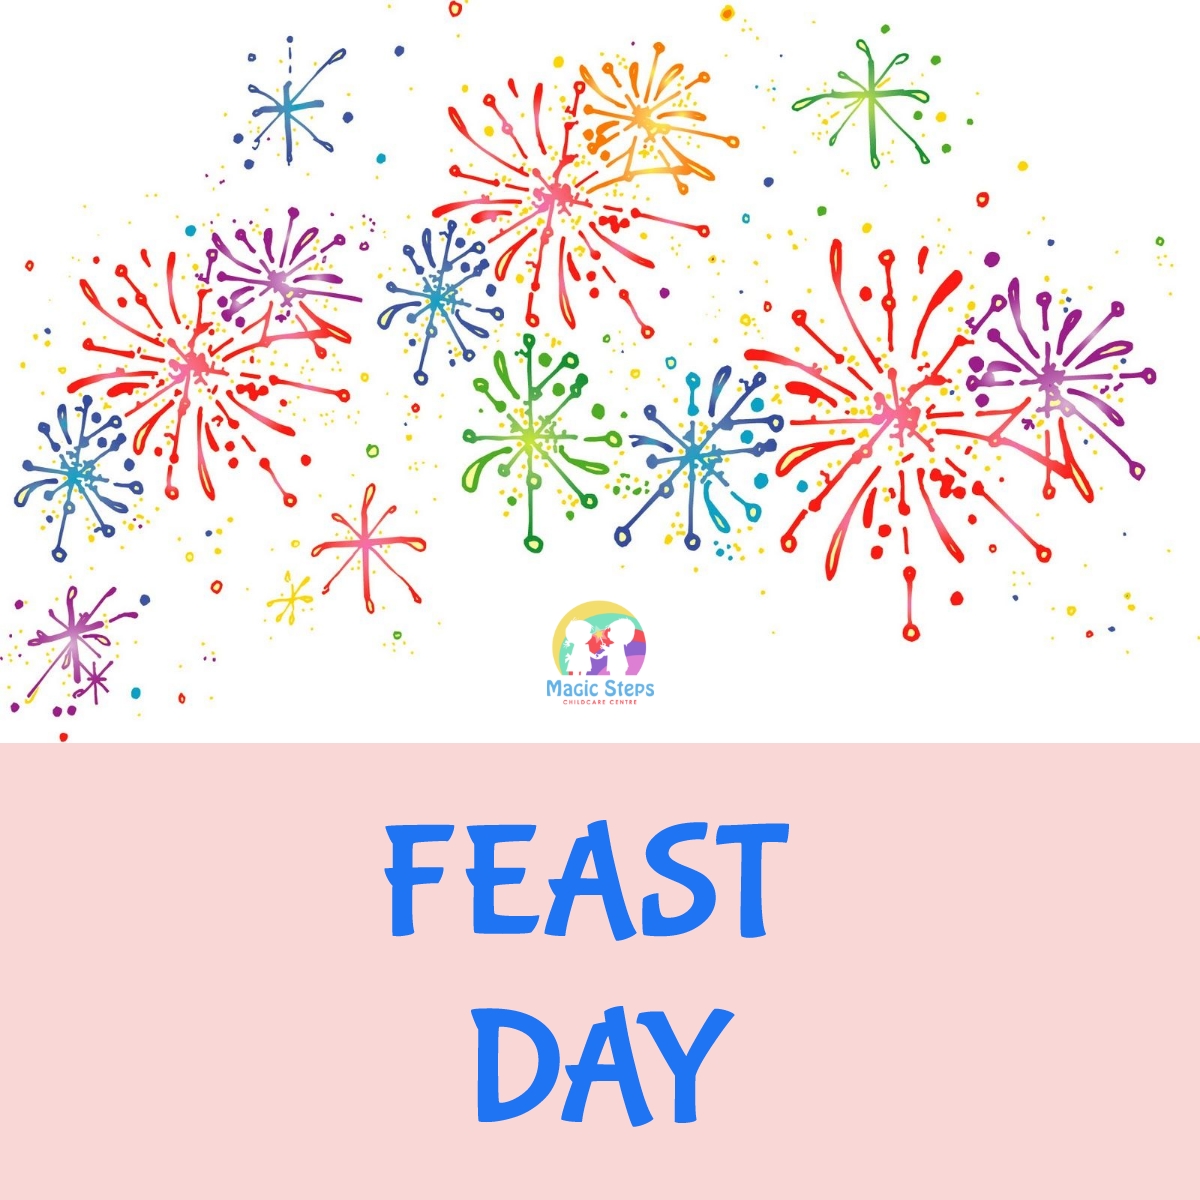 Feast Day- Monday 28th June